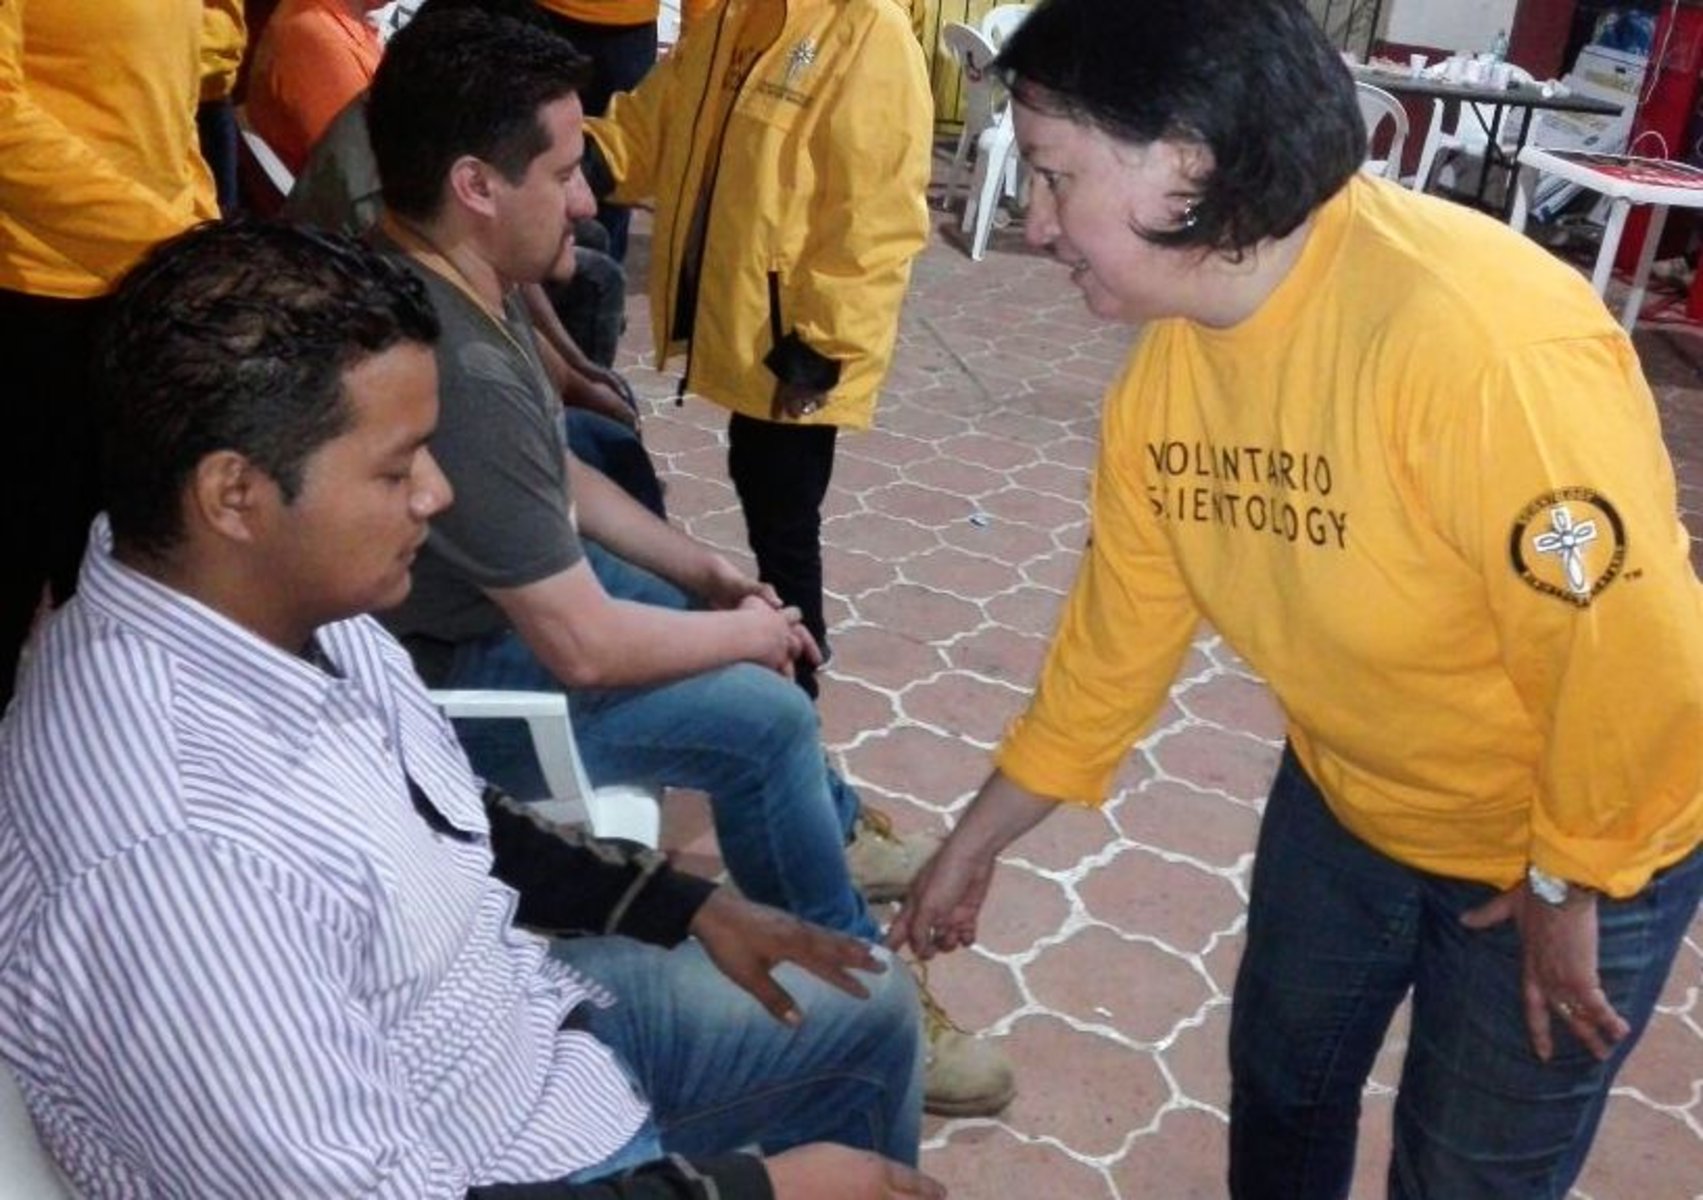 A Volunteer Minister provides relief using a Scientology assist to reduce pain, stress and trauma